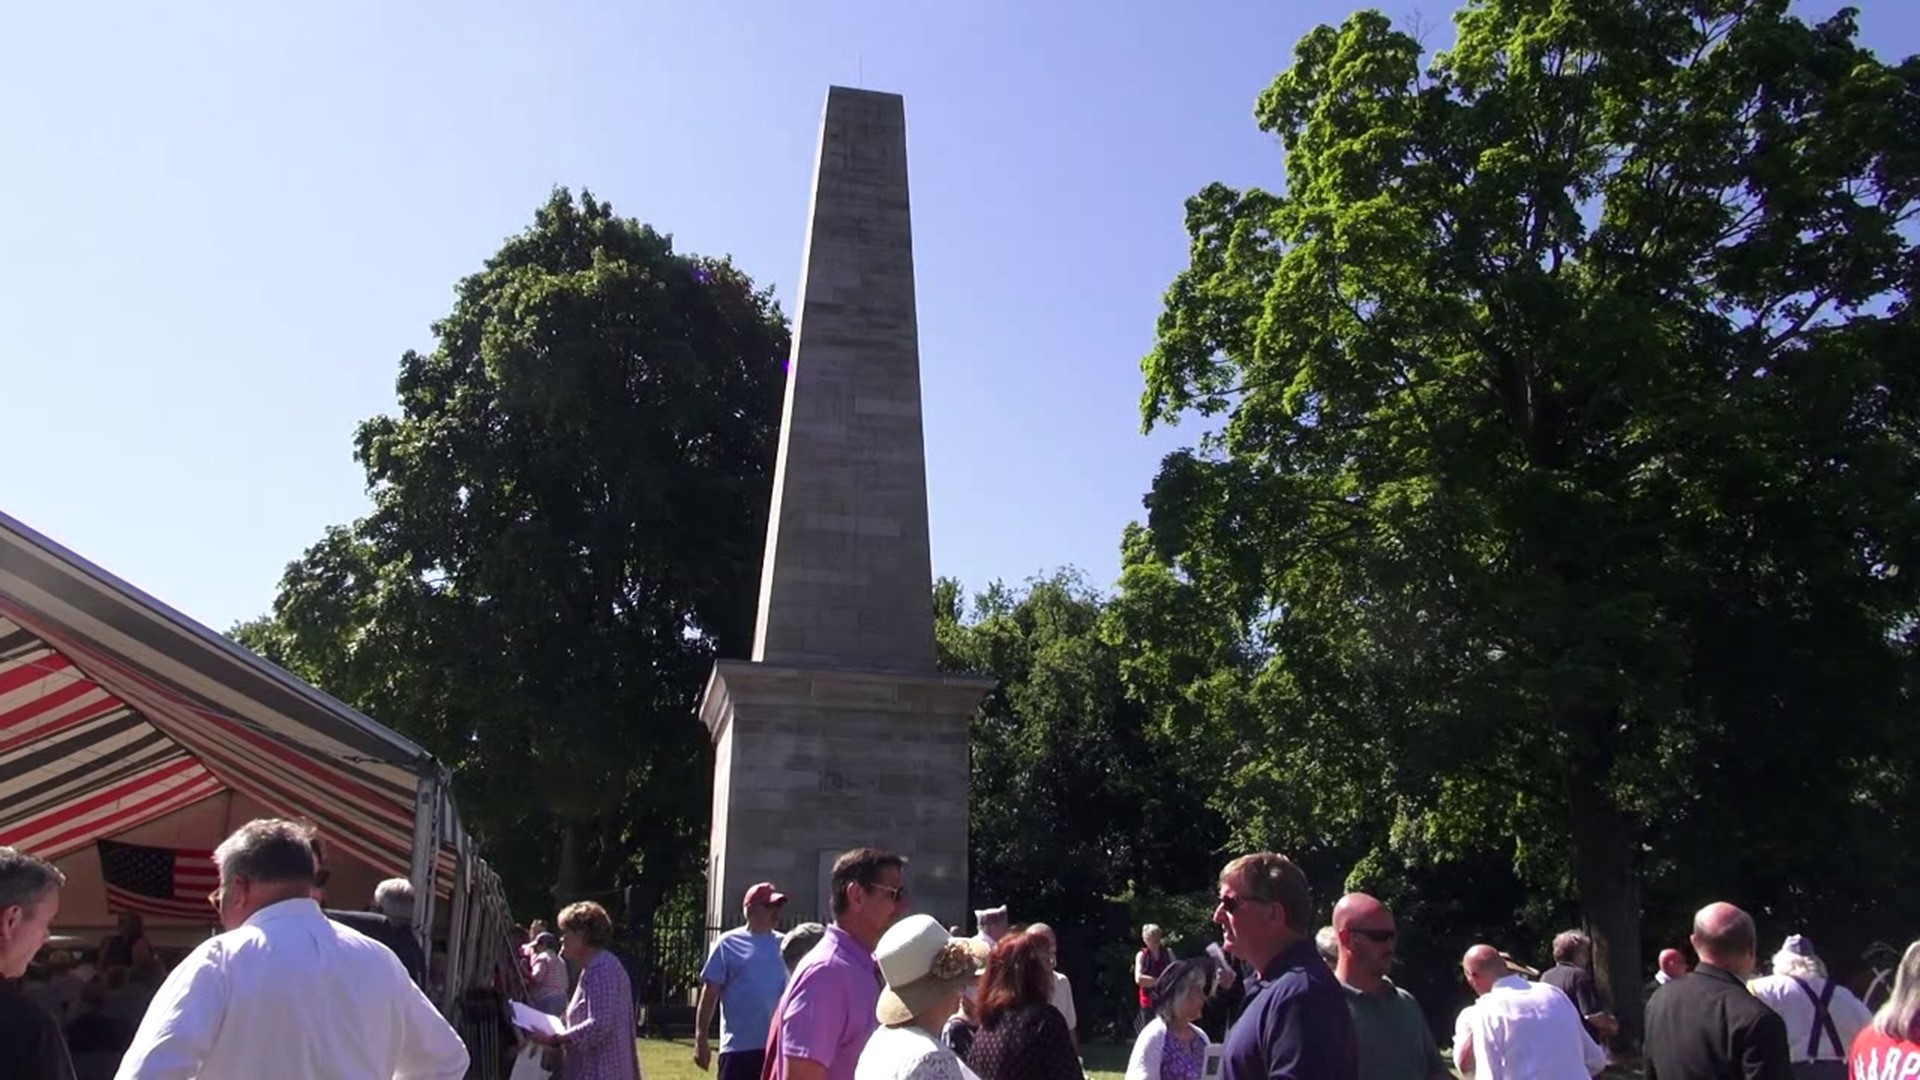 People in Luzerne County are commemorating one of the greatest American defeats of the Revolutionary War.